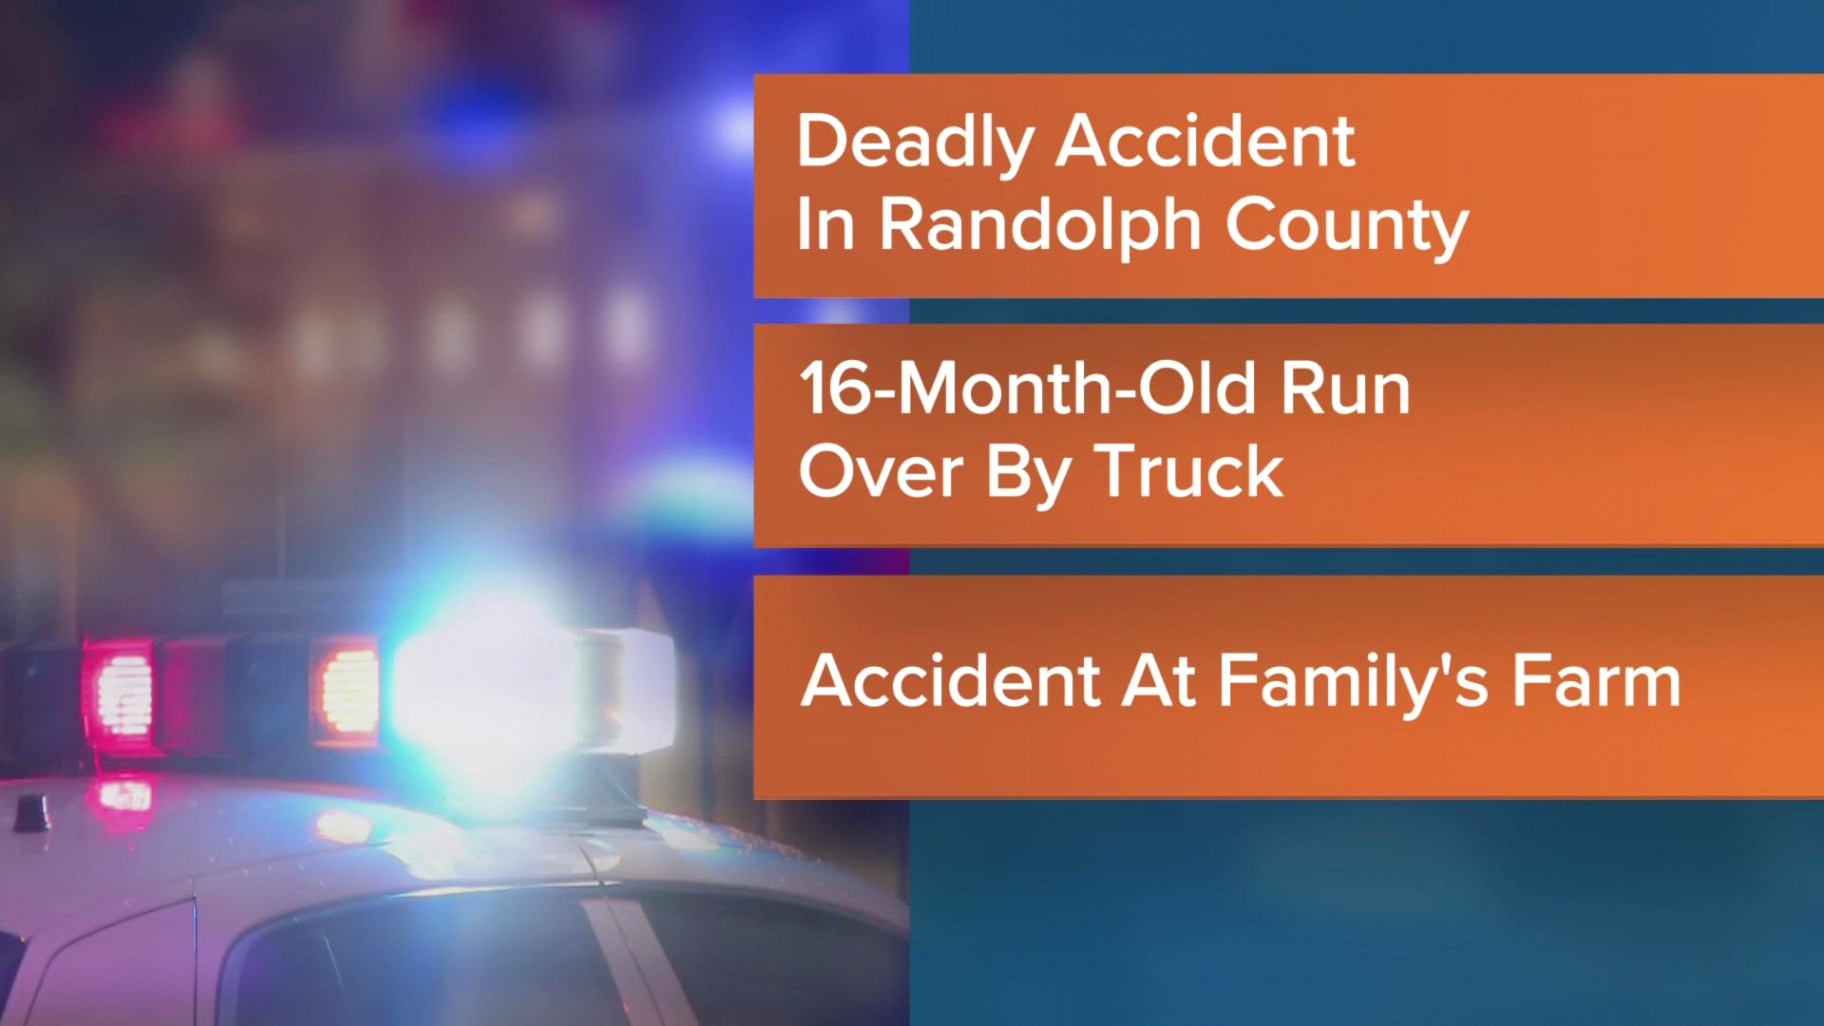 Car Accident Lawyer In Randolph Nc Dans toddler Run Over by Dad's Truck Dies